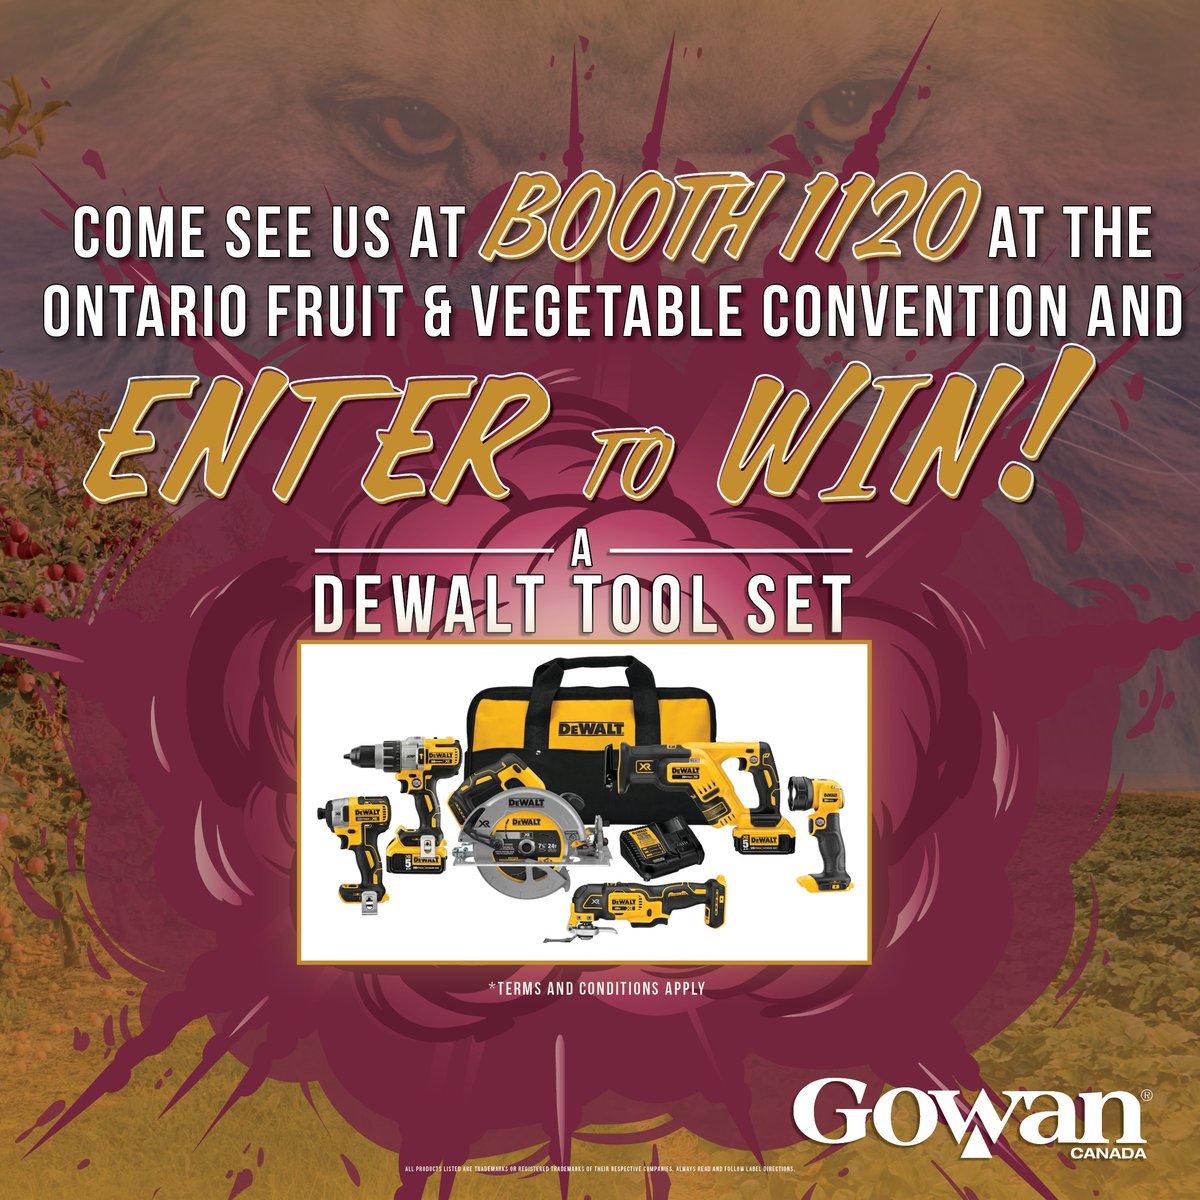 See you all at booth 1120 at next weeks OFVC! Stop by and enter for your chance to win a Dewalt tool set from Gowan Canada!